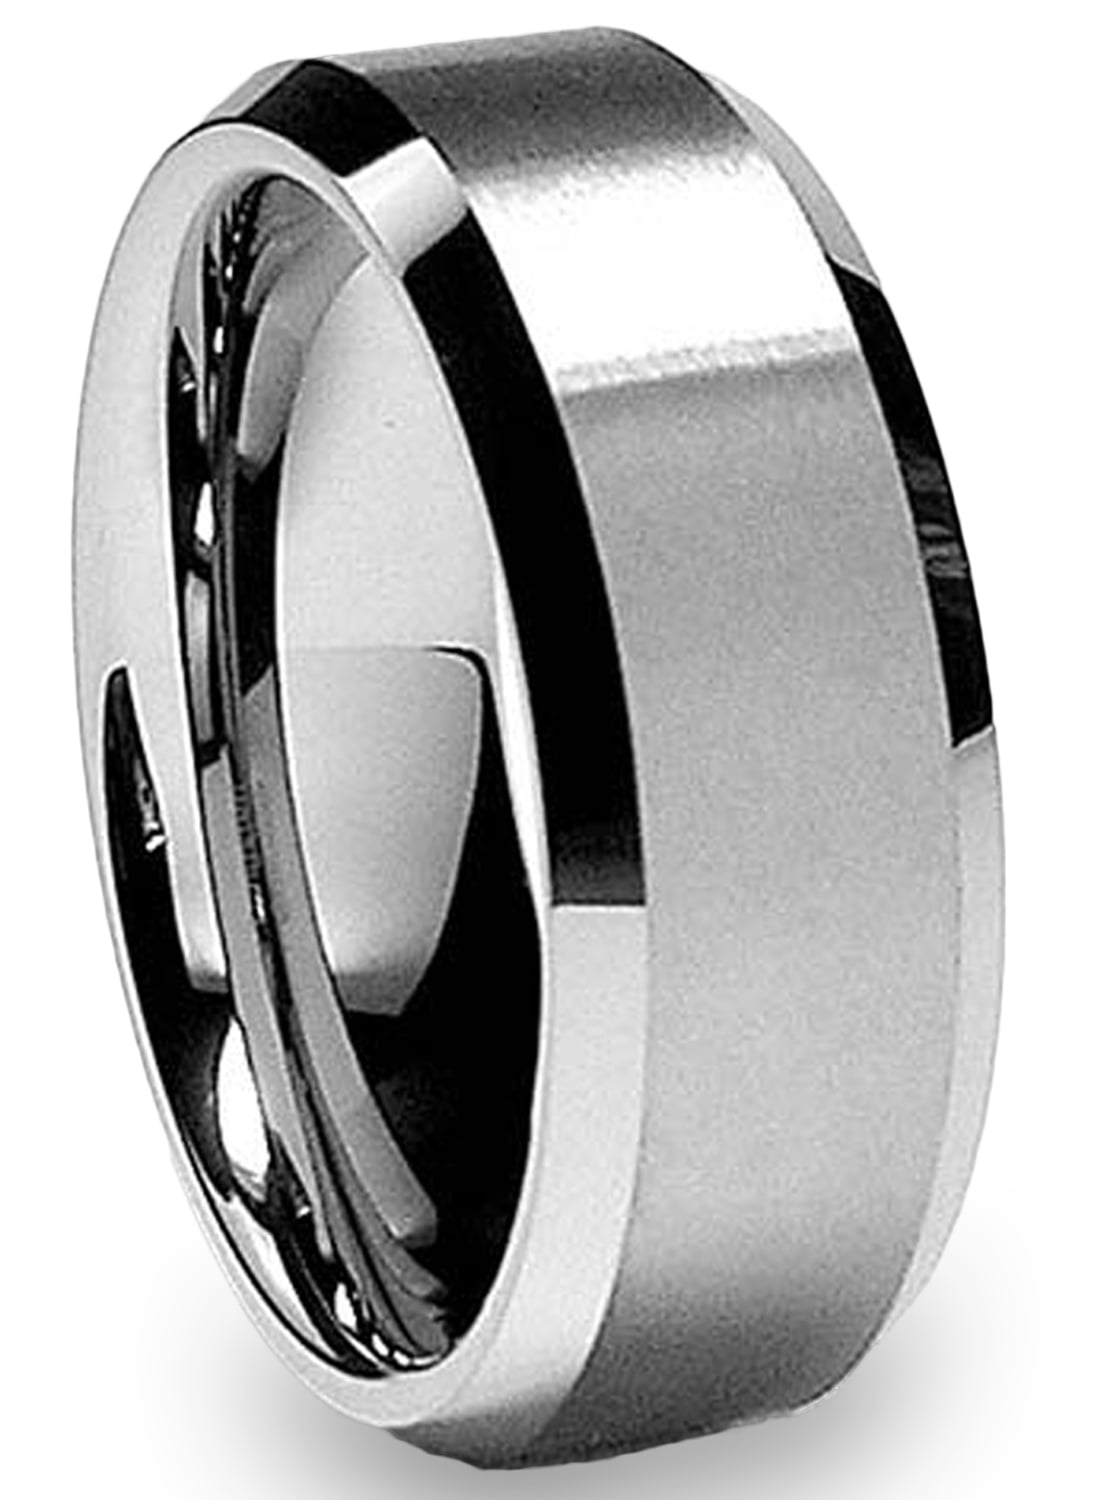 Stainless Steel Matte Finish Mens Wedding Band Ring with High Polished Center 